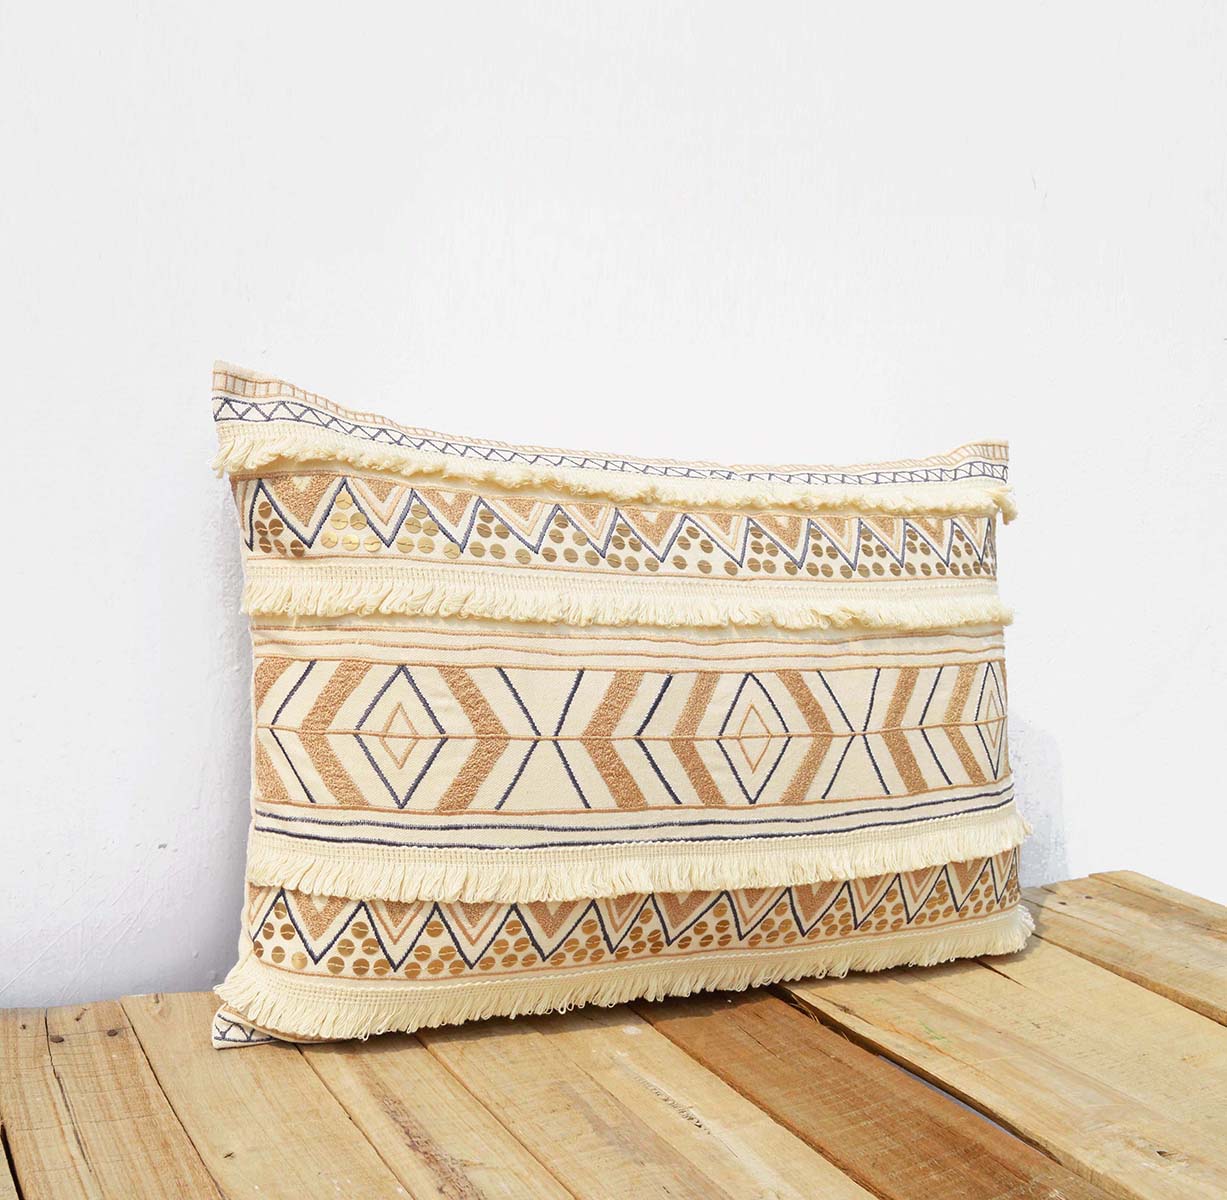 Handira - Cream cotton embroidered cushion cover, Sizes available